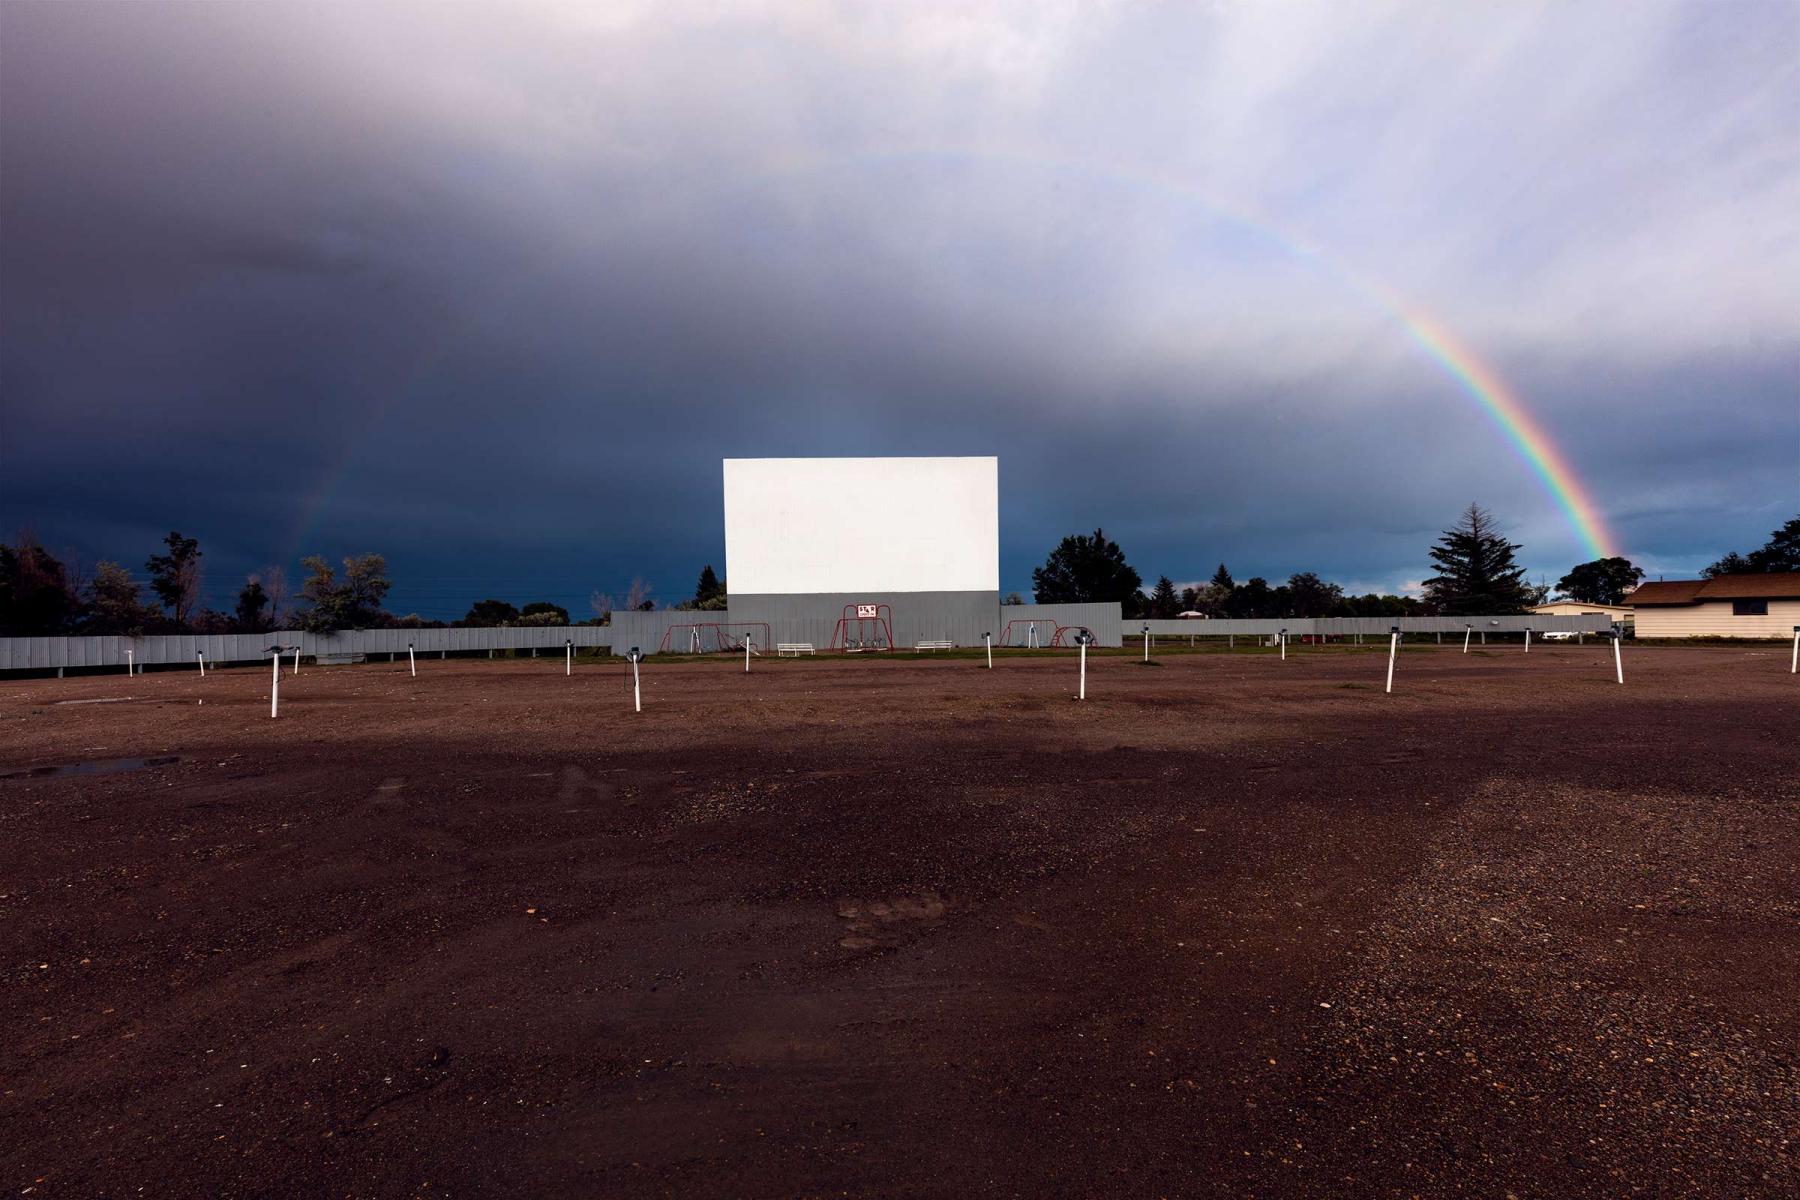 Best Western Movie Manor Star Drive Inn Theater with free rainbow  : Visiting Mom : New York City based photographer and video specializing in portrait corporate portraits, video, editorial stories for on location and architectural photography